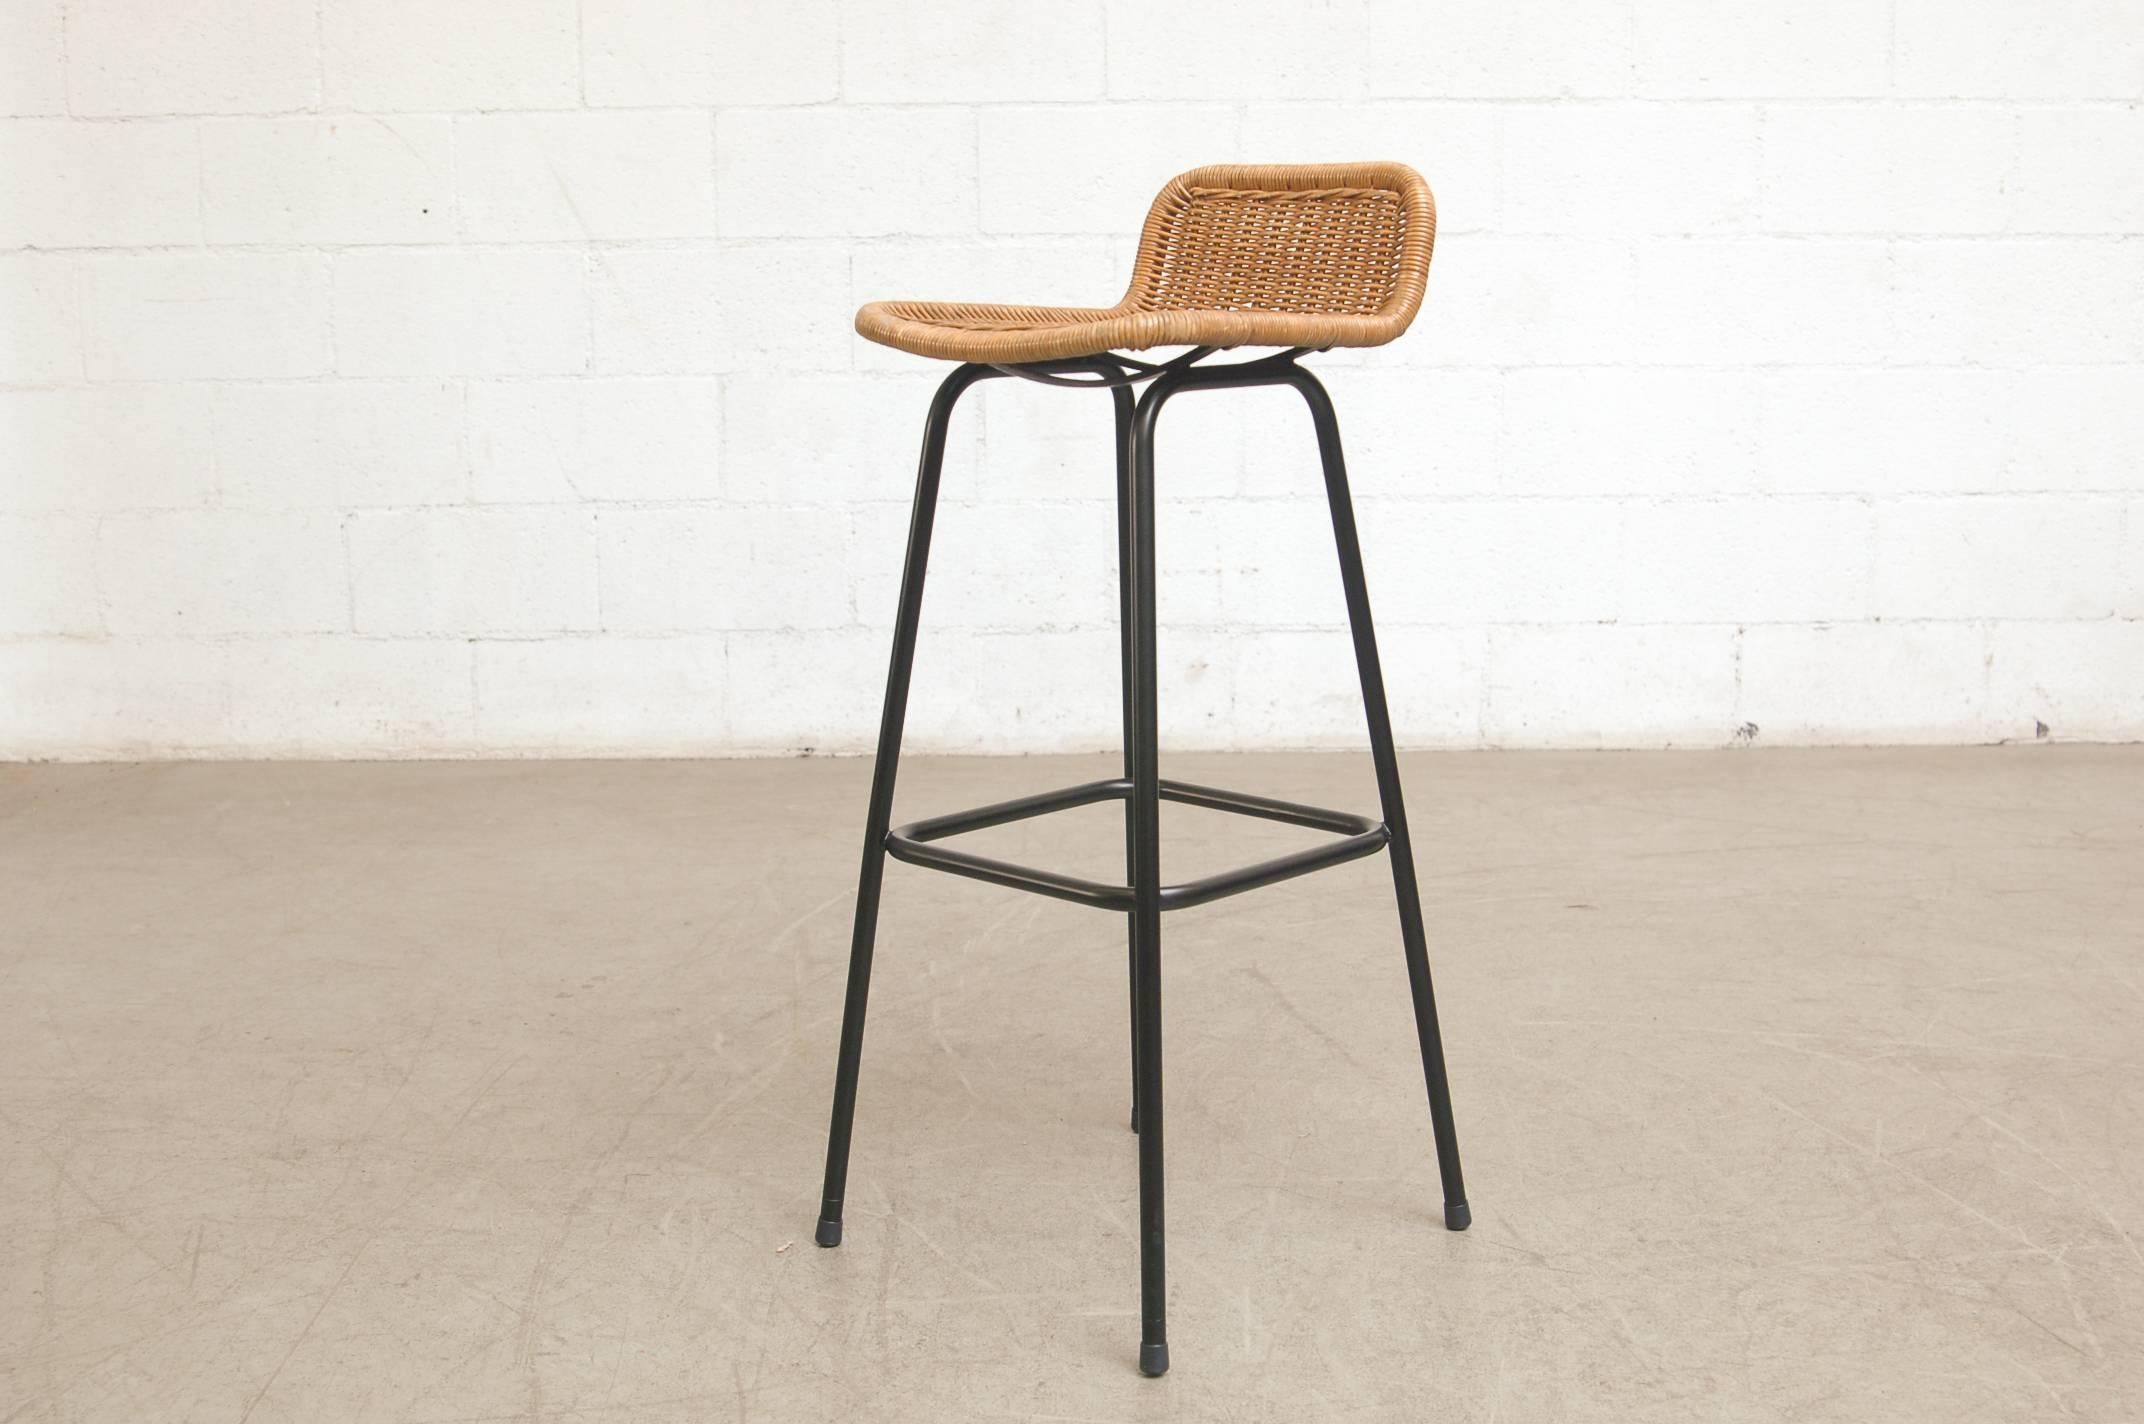 Charlotte Perriand style low rounded wicker back bar stools with black enameled tubular frames. Visible wear to rattan, minimal losses. Wicker colors vary from stool to stool, as well as wear to seats and frames. In original condition with visible